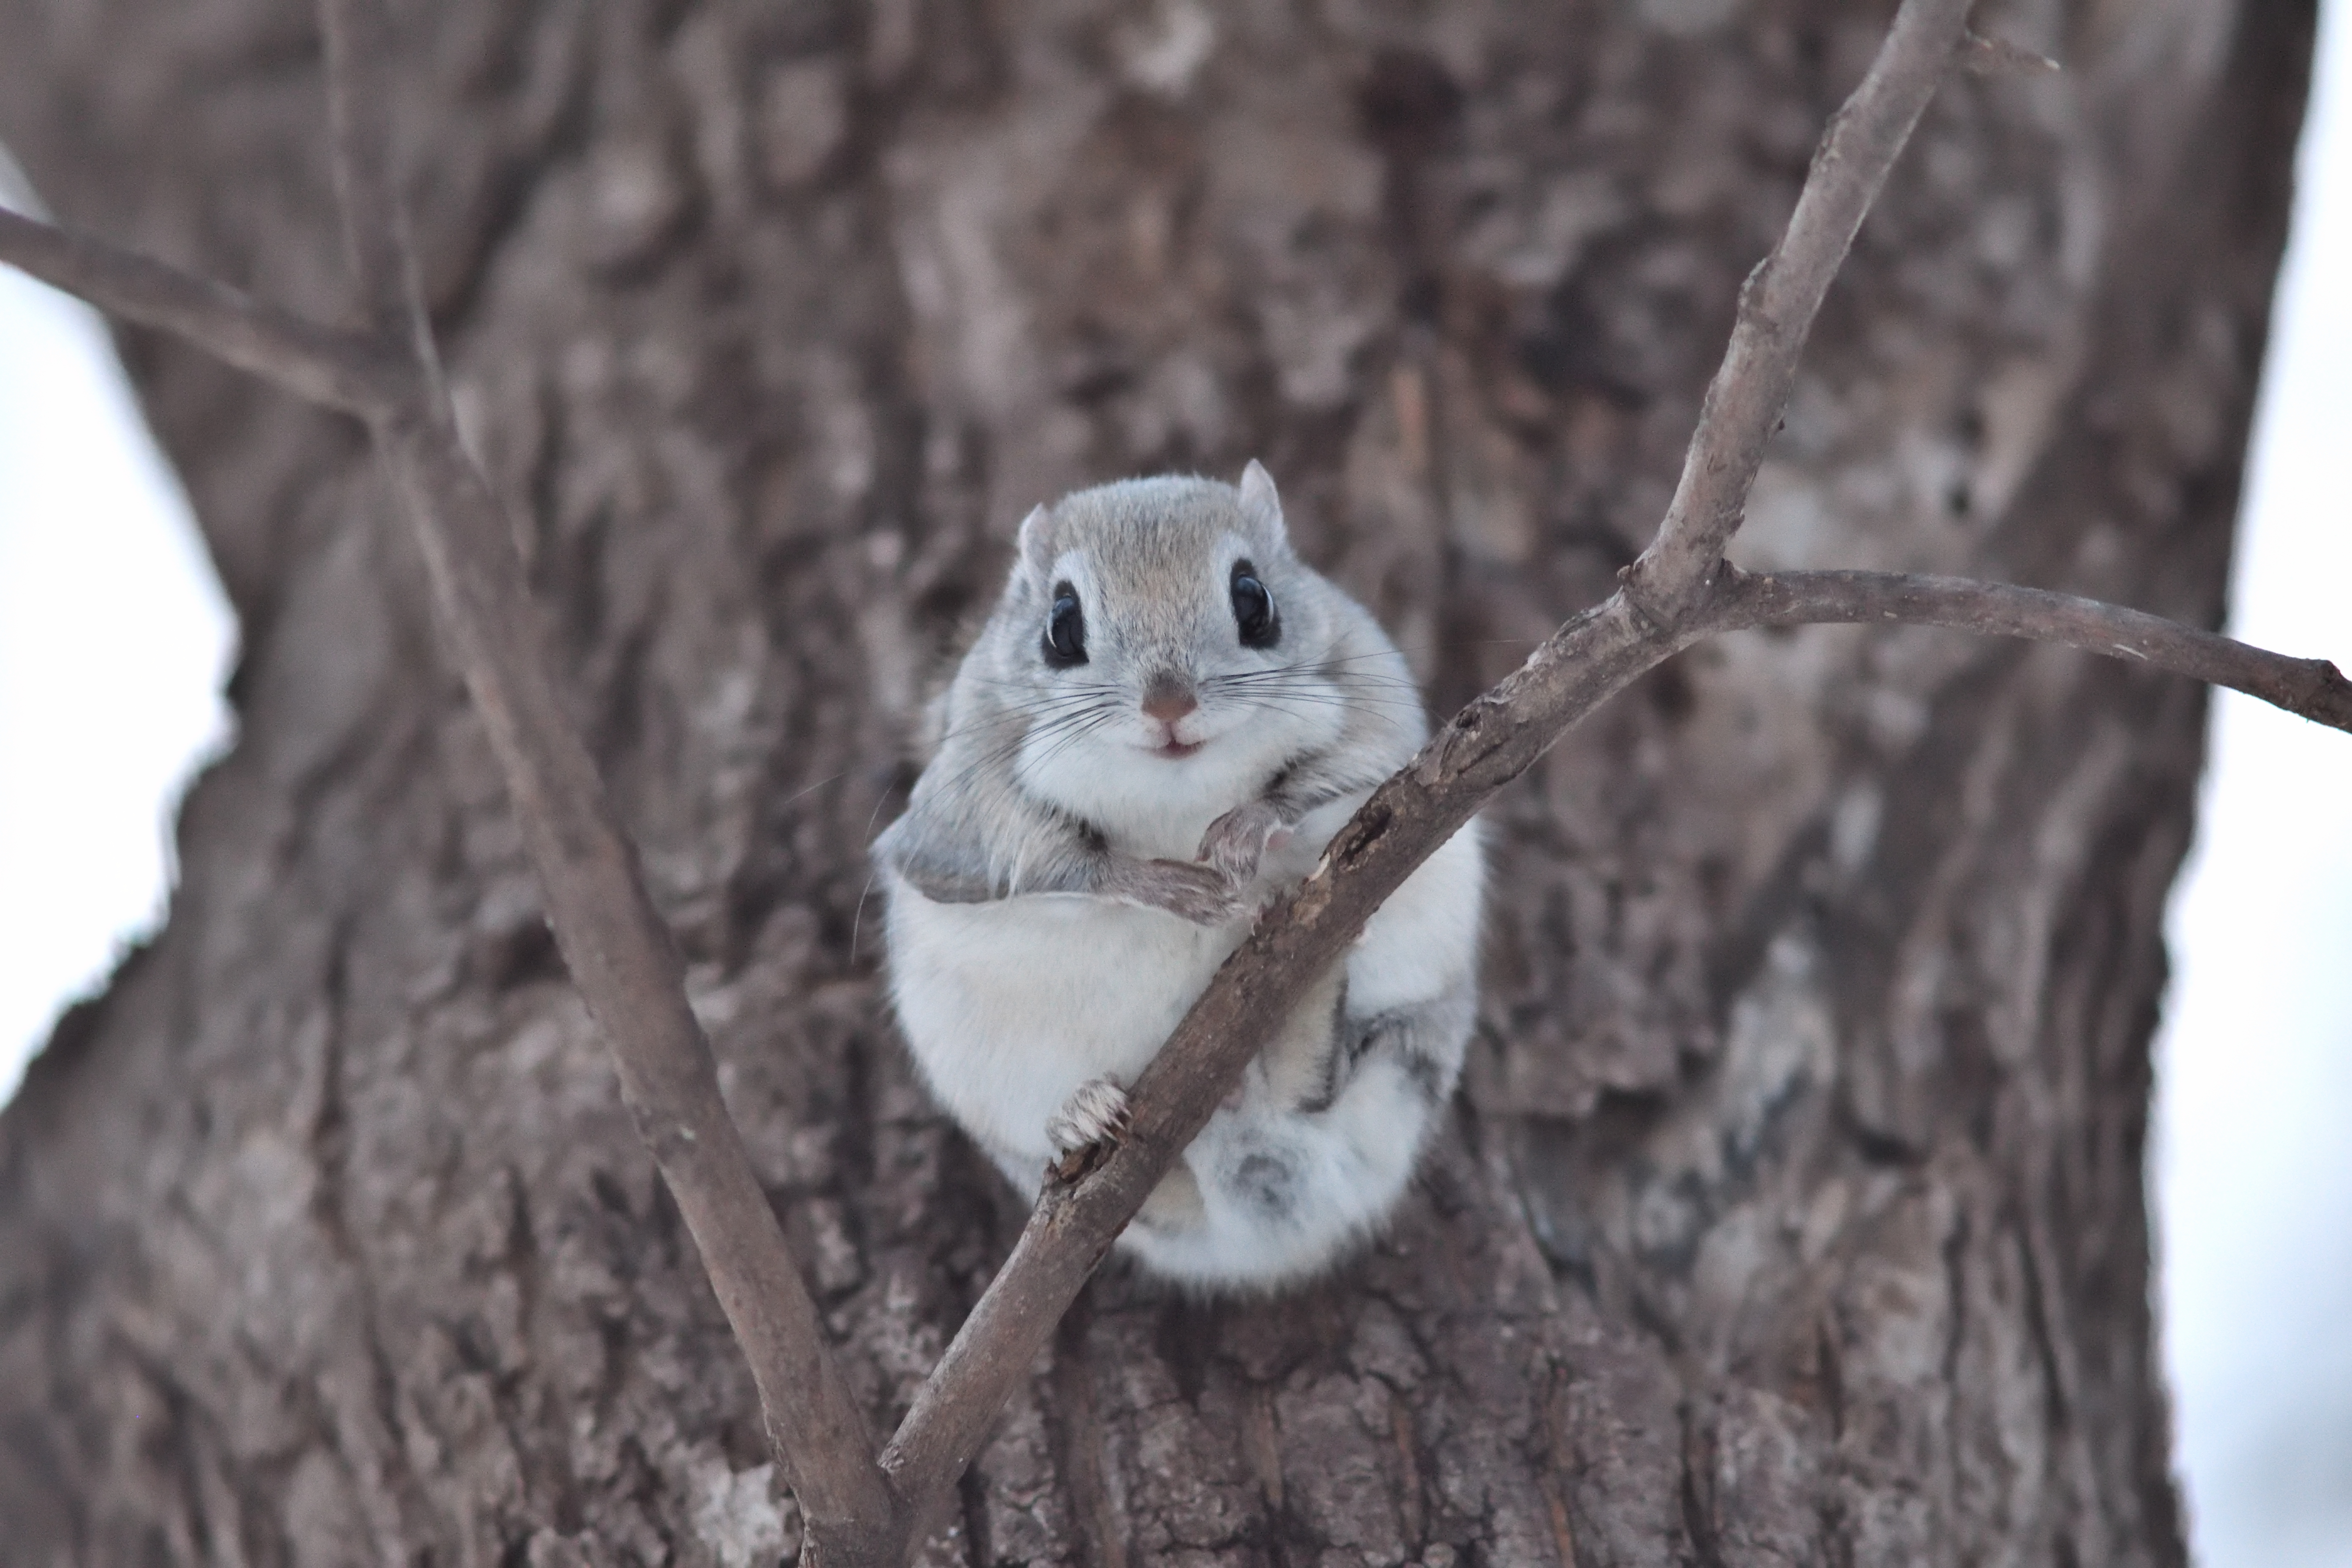 Ezo flying squirrel is leaning against a giant tree